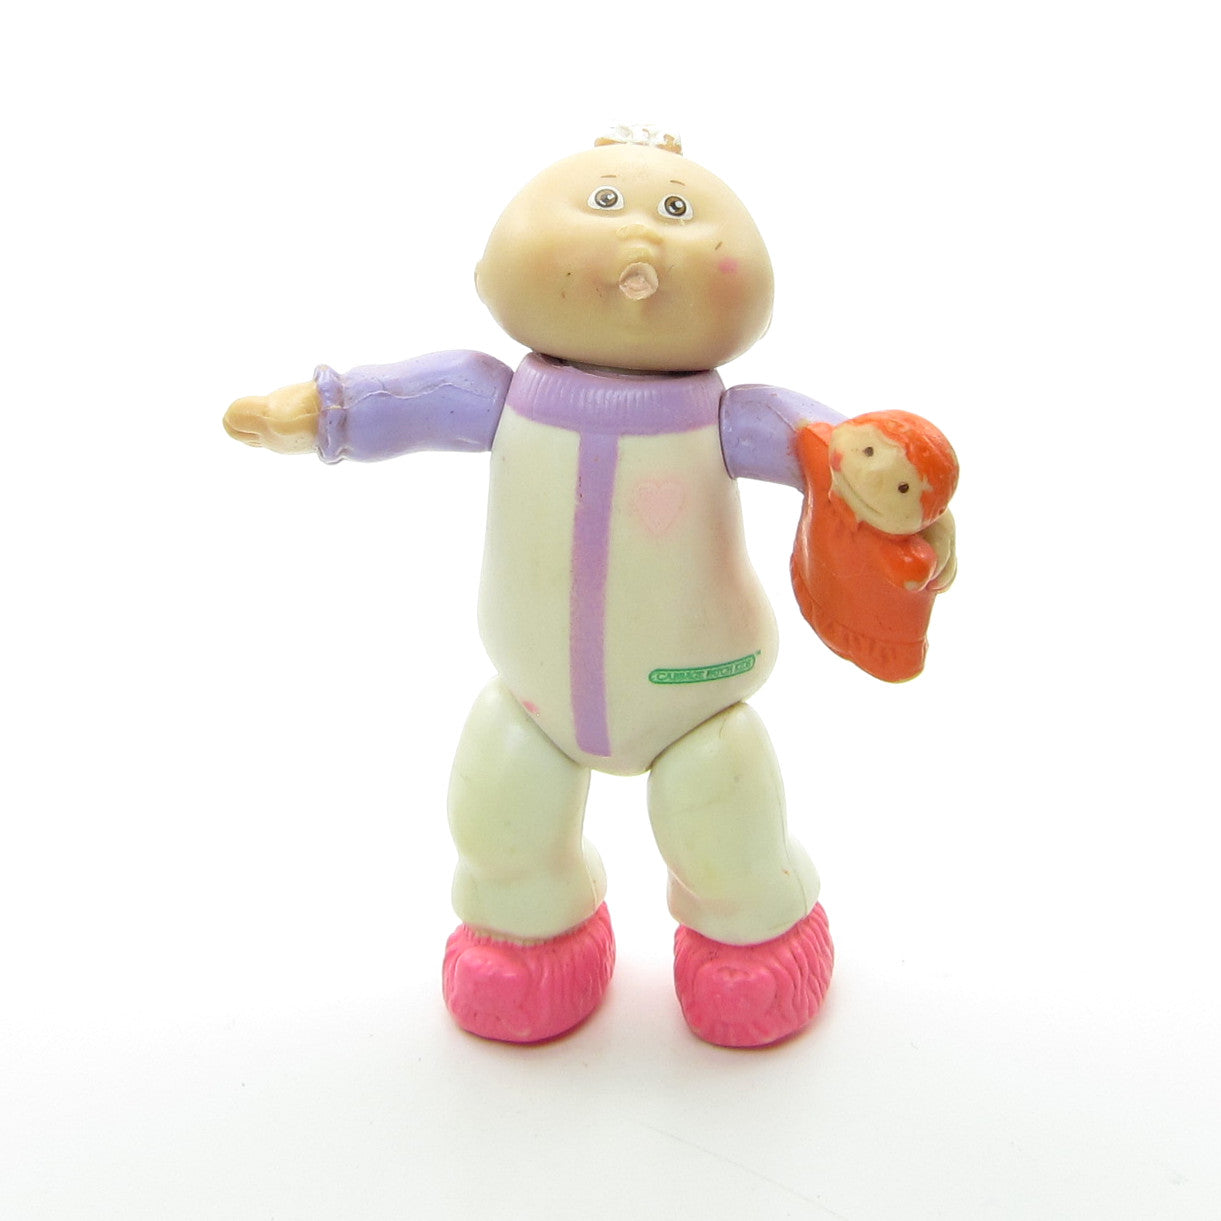 Cabbage Patch Kids Preemie poseable figure with doll